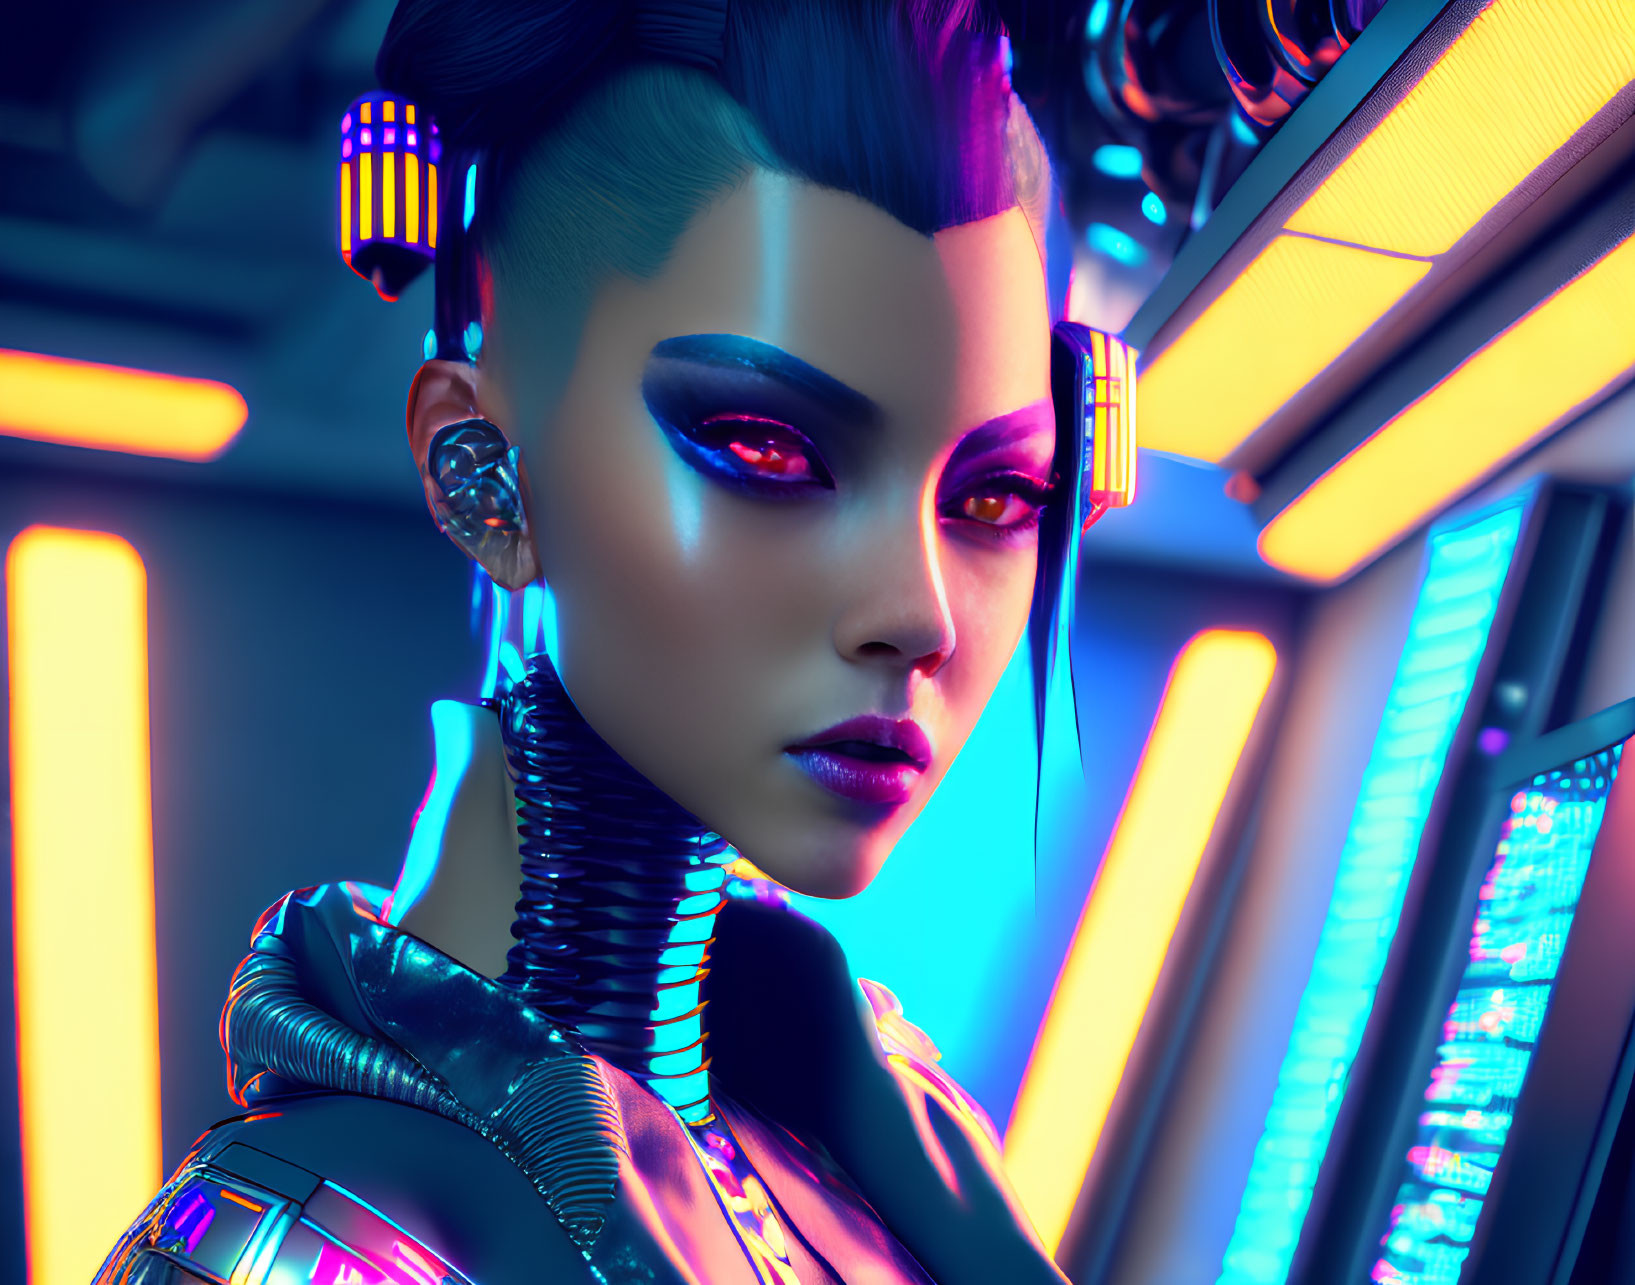 Futuristic woman with cybernetic enhancements in neon-lit sci-fi setting